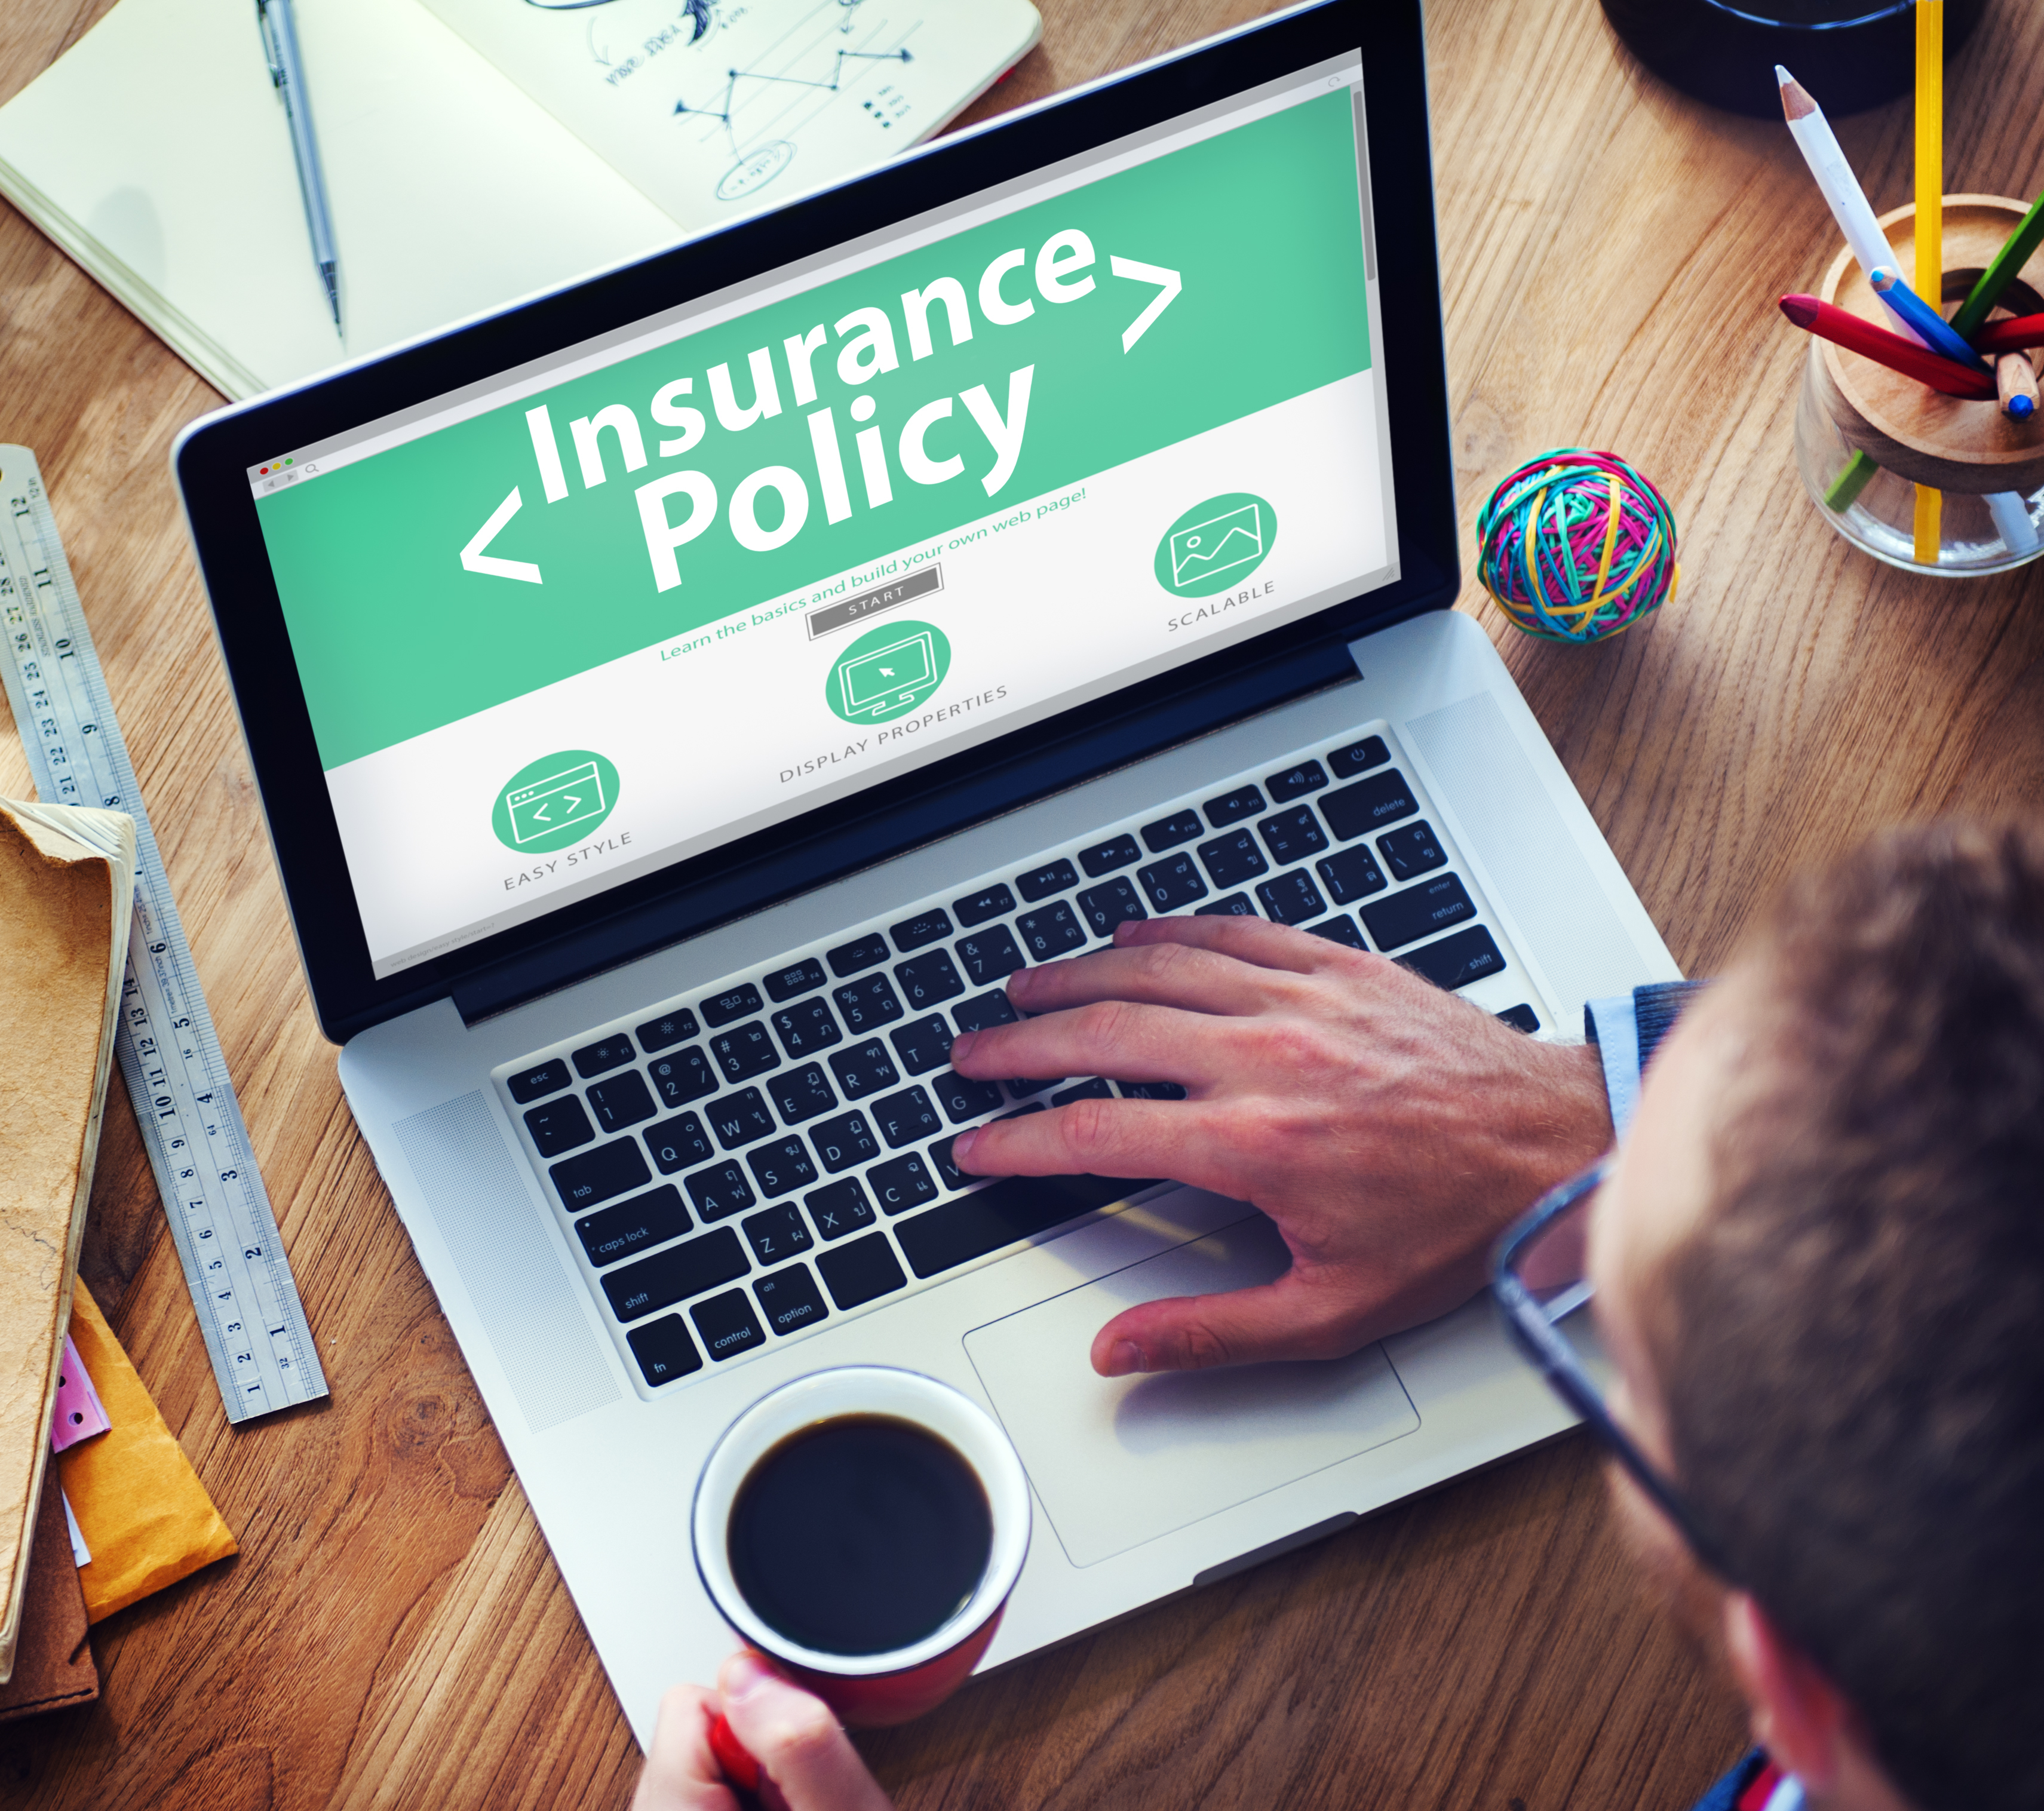 With Google Gone, What's the Future for Online Insurance Shopping?